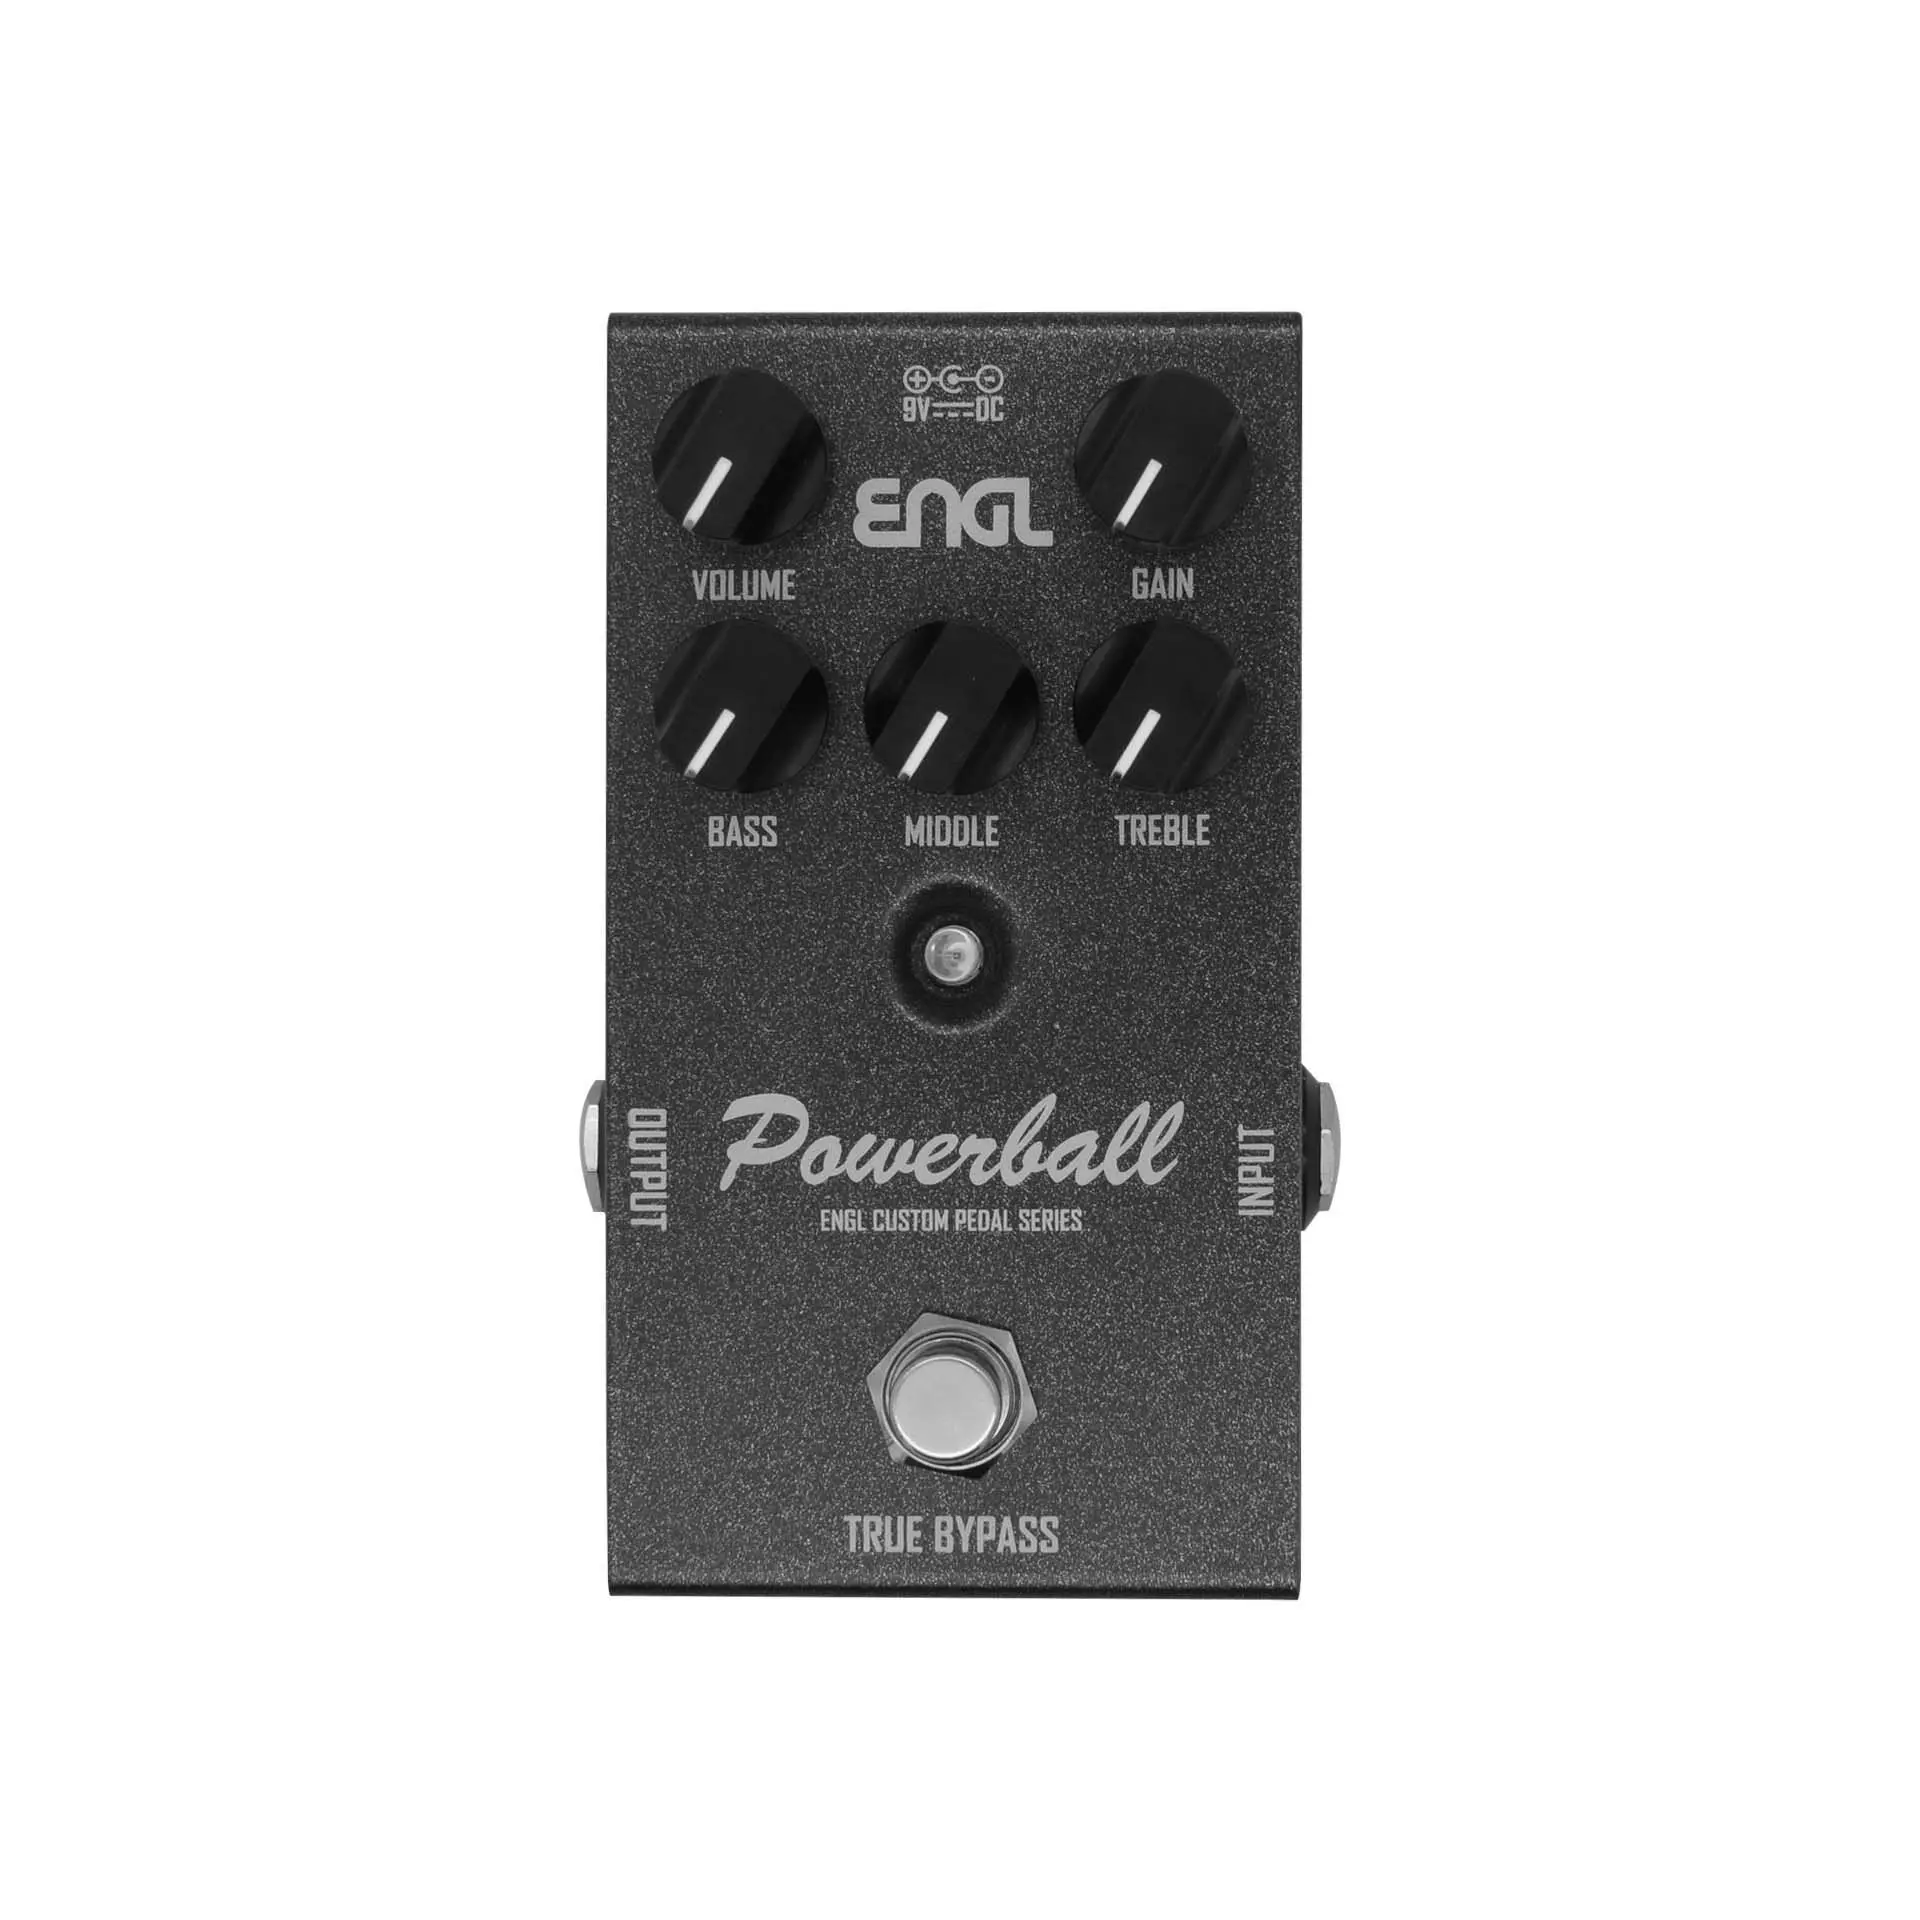 Powerball EP645 - ENGL Amplification